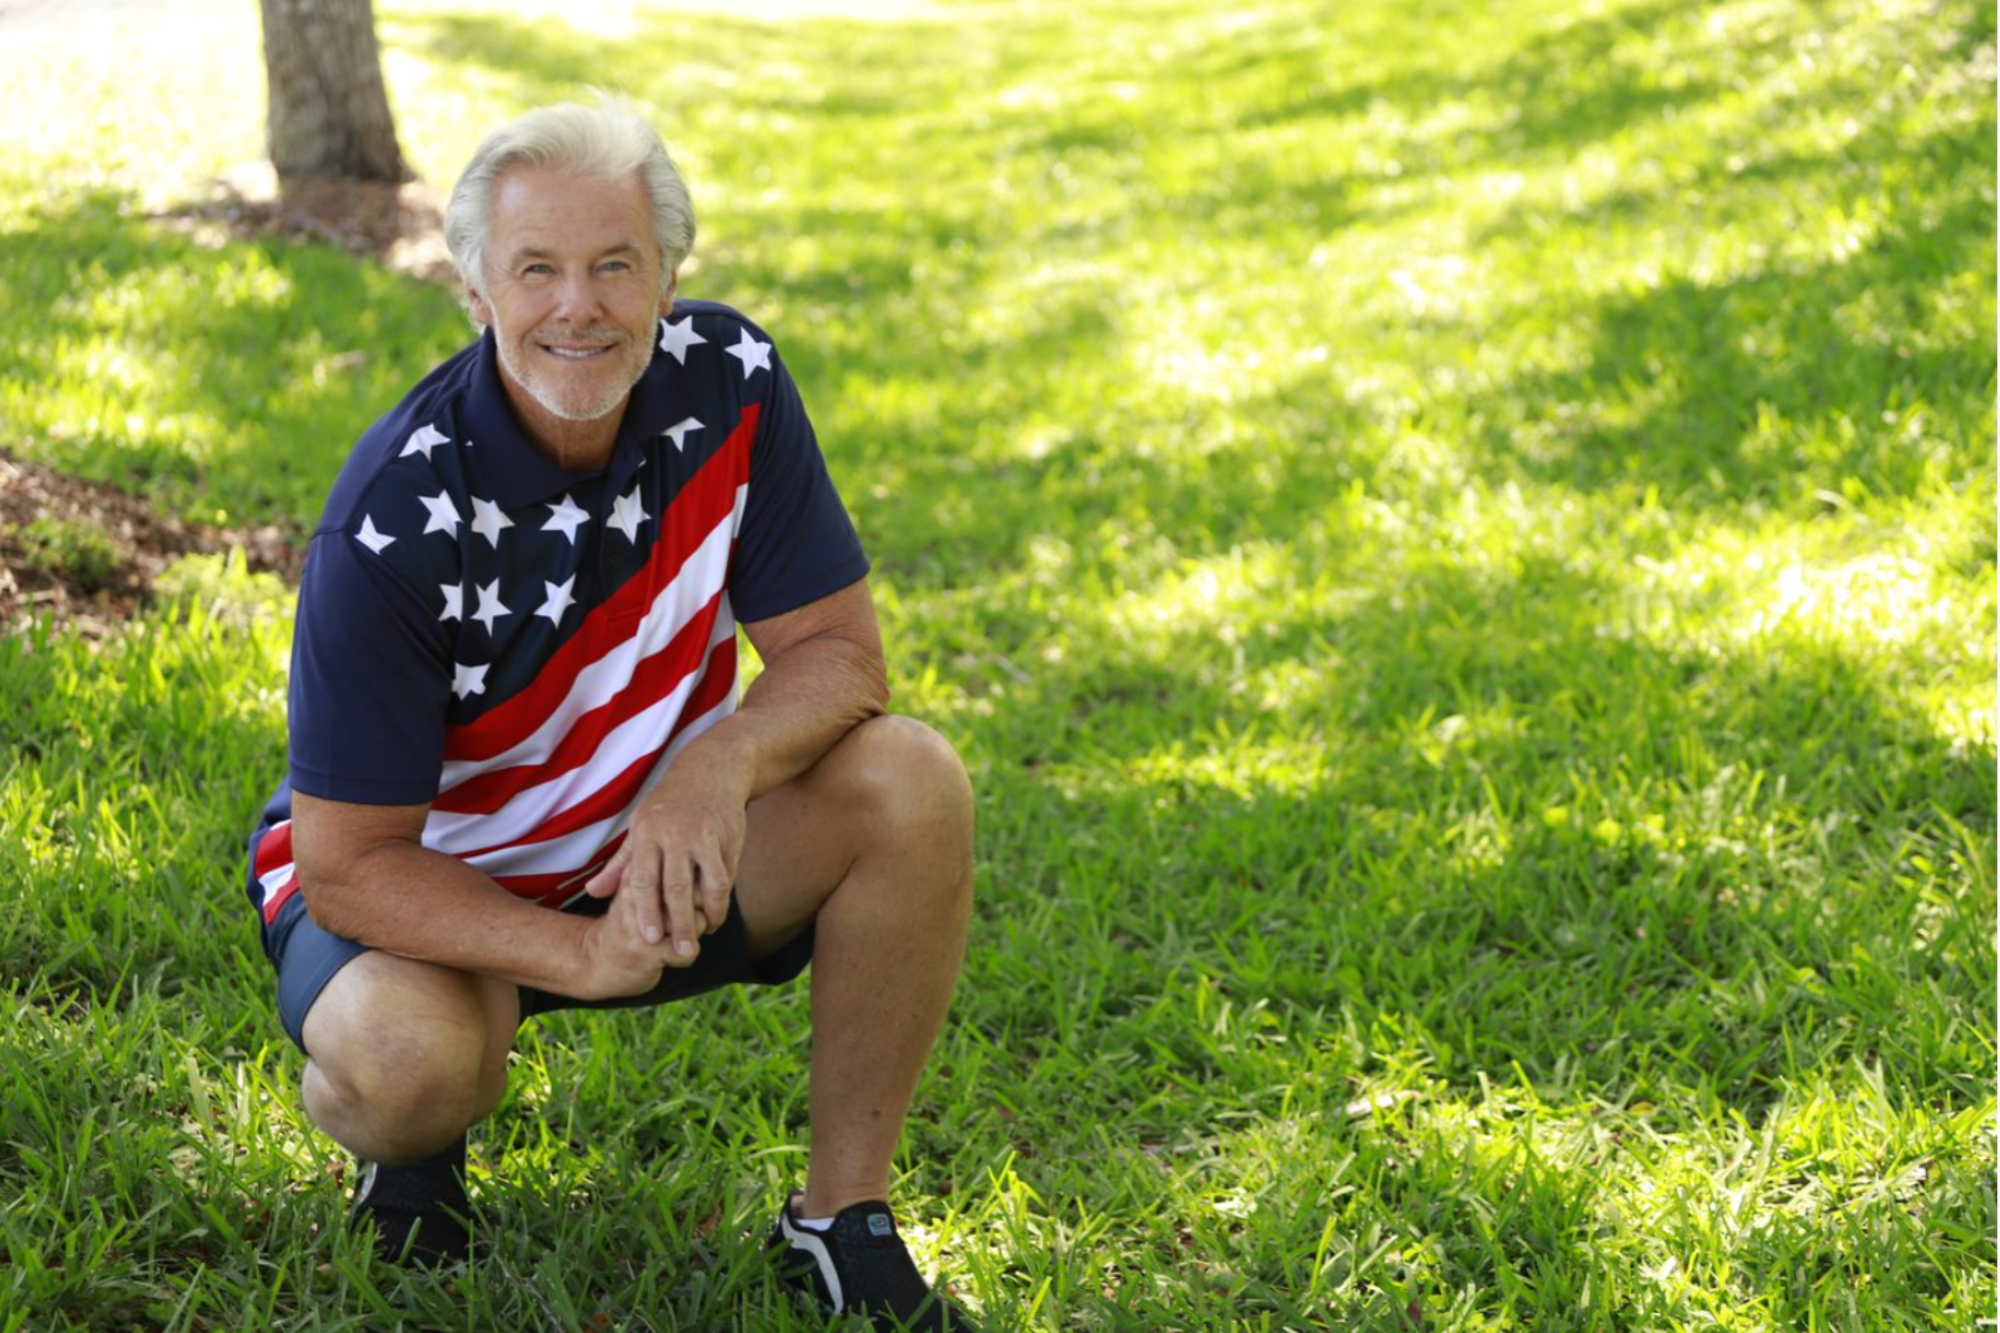 Why You Need a Patriotic Shirt for All Seasons